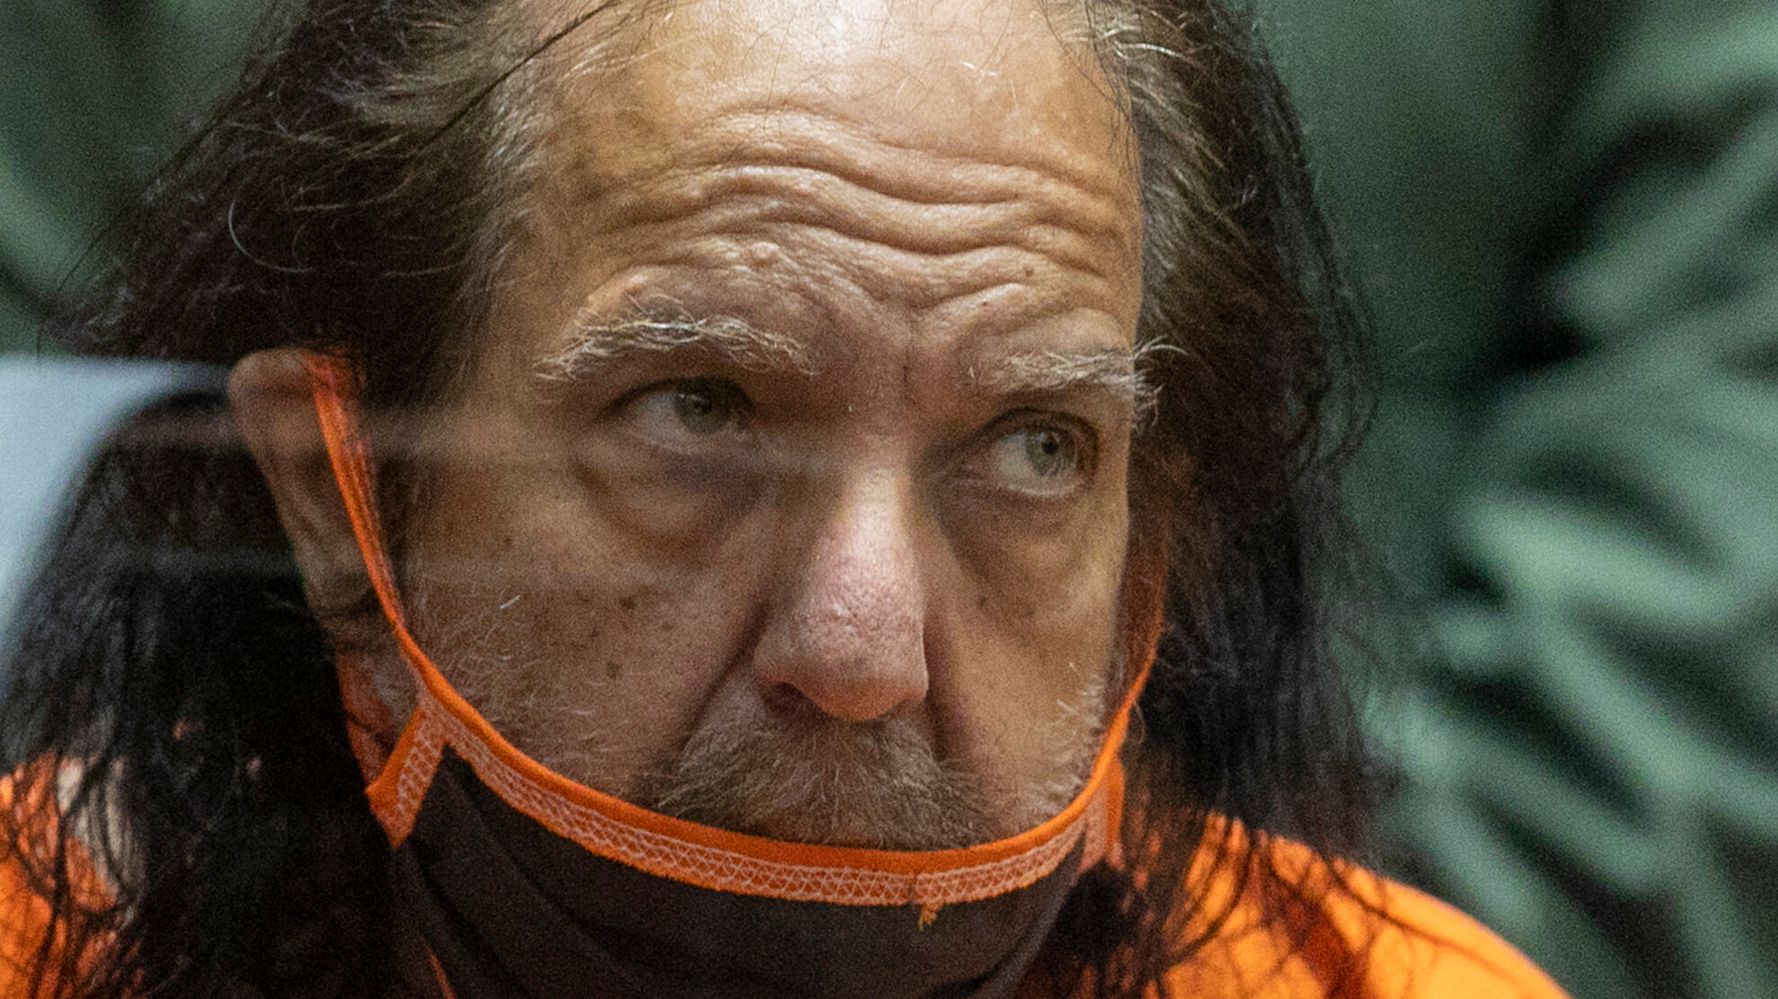 Hot Sex Unconscious Indian Girl - Ron Jeremy Set To Be Declared Incompetent To Stand Trial For Rape Due To  'Severe Dementia' | HuffPost Latest News